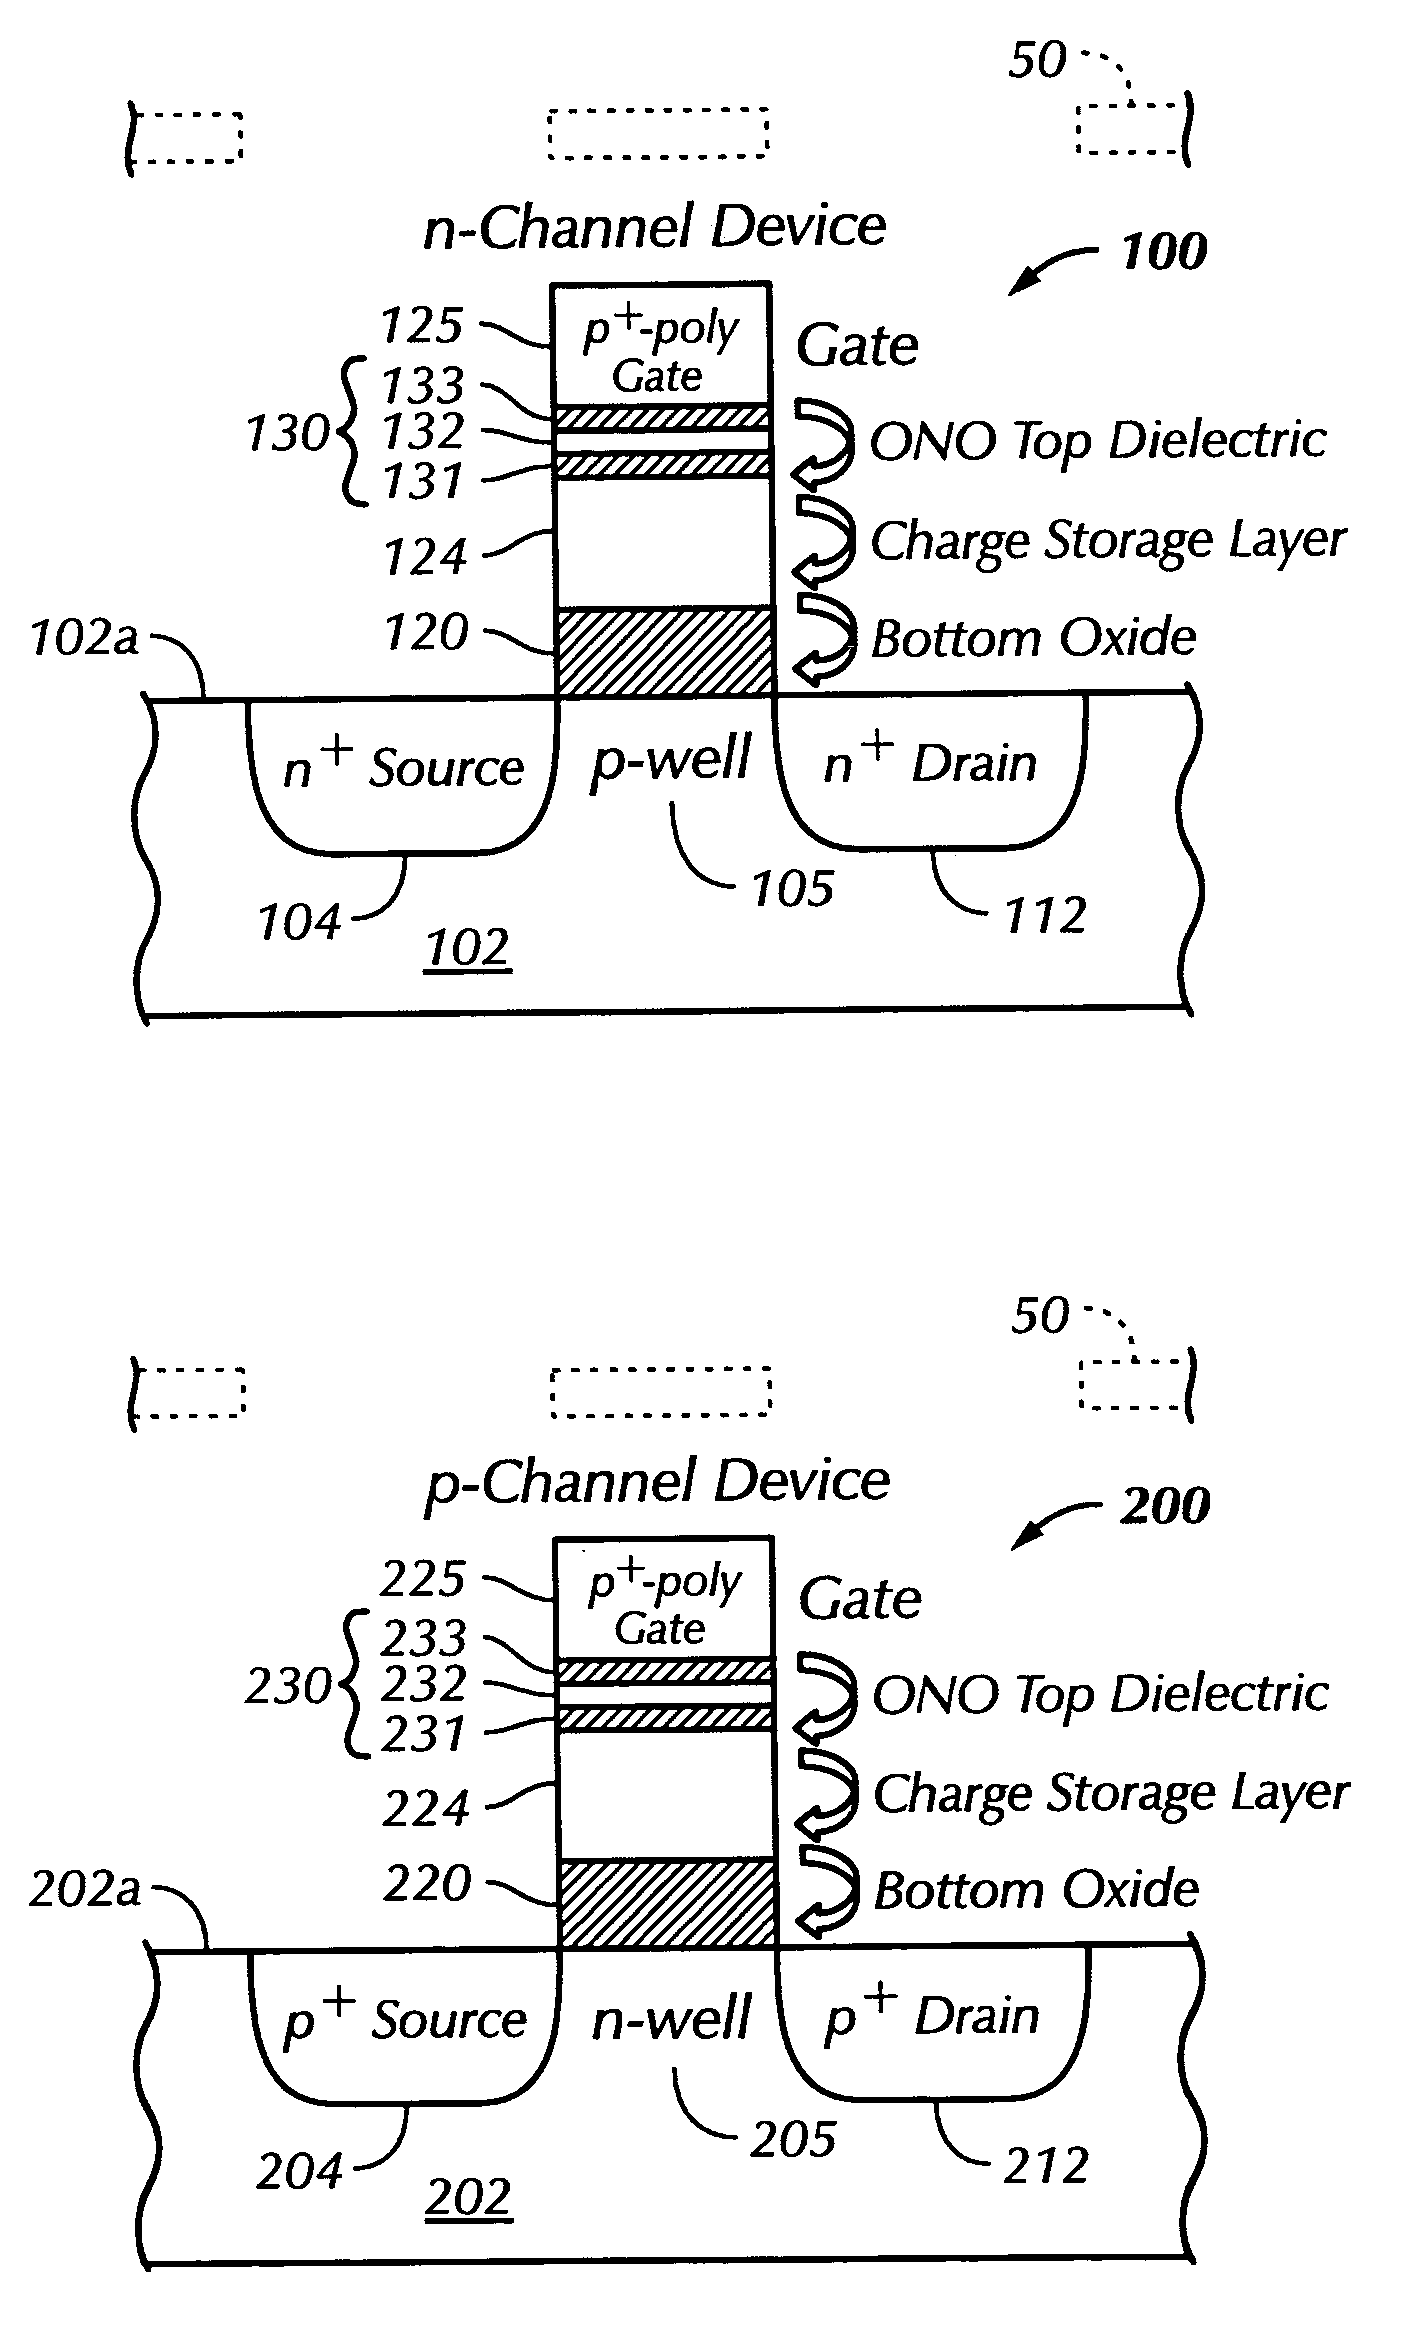 Non-volatile memory semiconductor device having an oxide-nitride-oxide (ONO) top dielectric layer